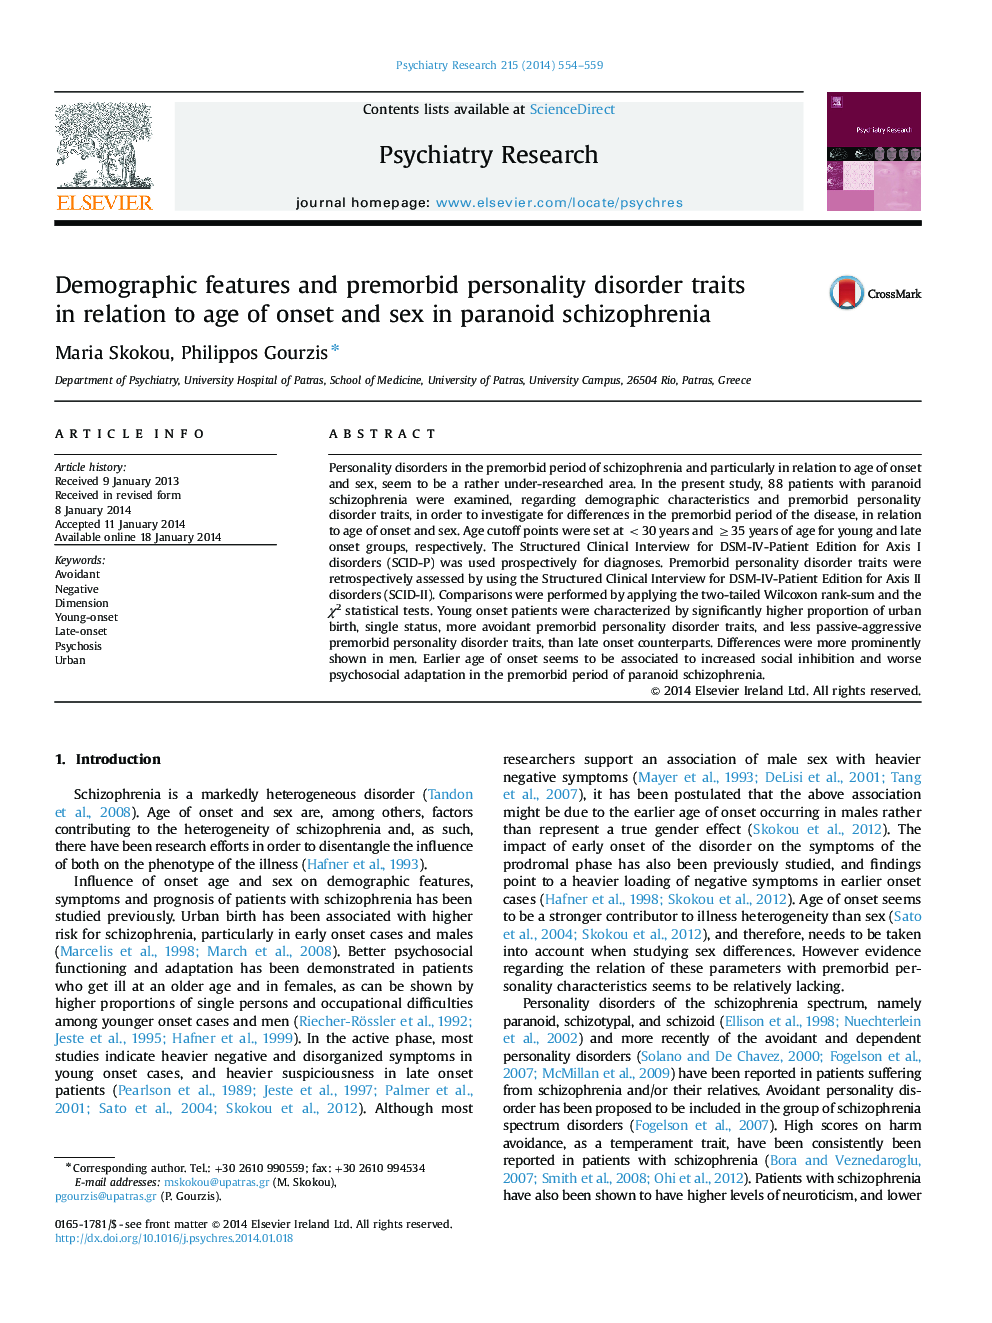 Demographic features and premorbid personality disorder traits in relation to age of onset and sex in paranoid schizophrenia